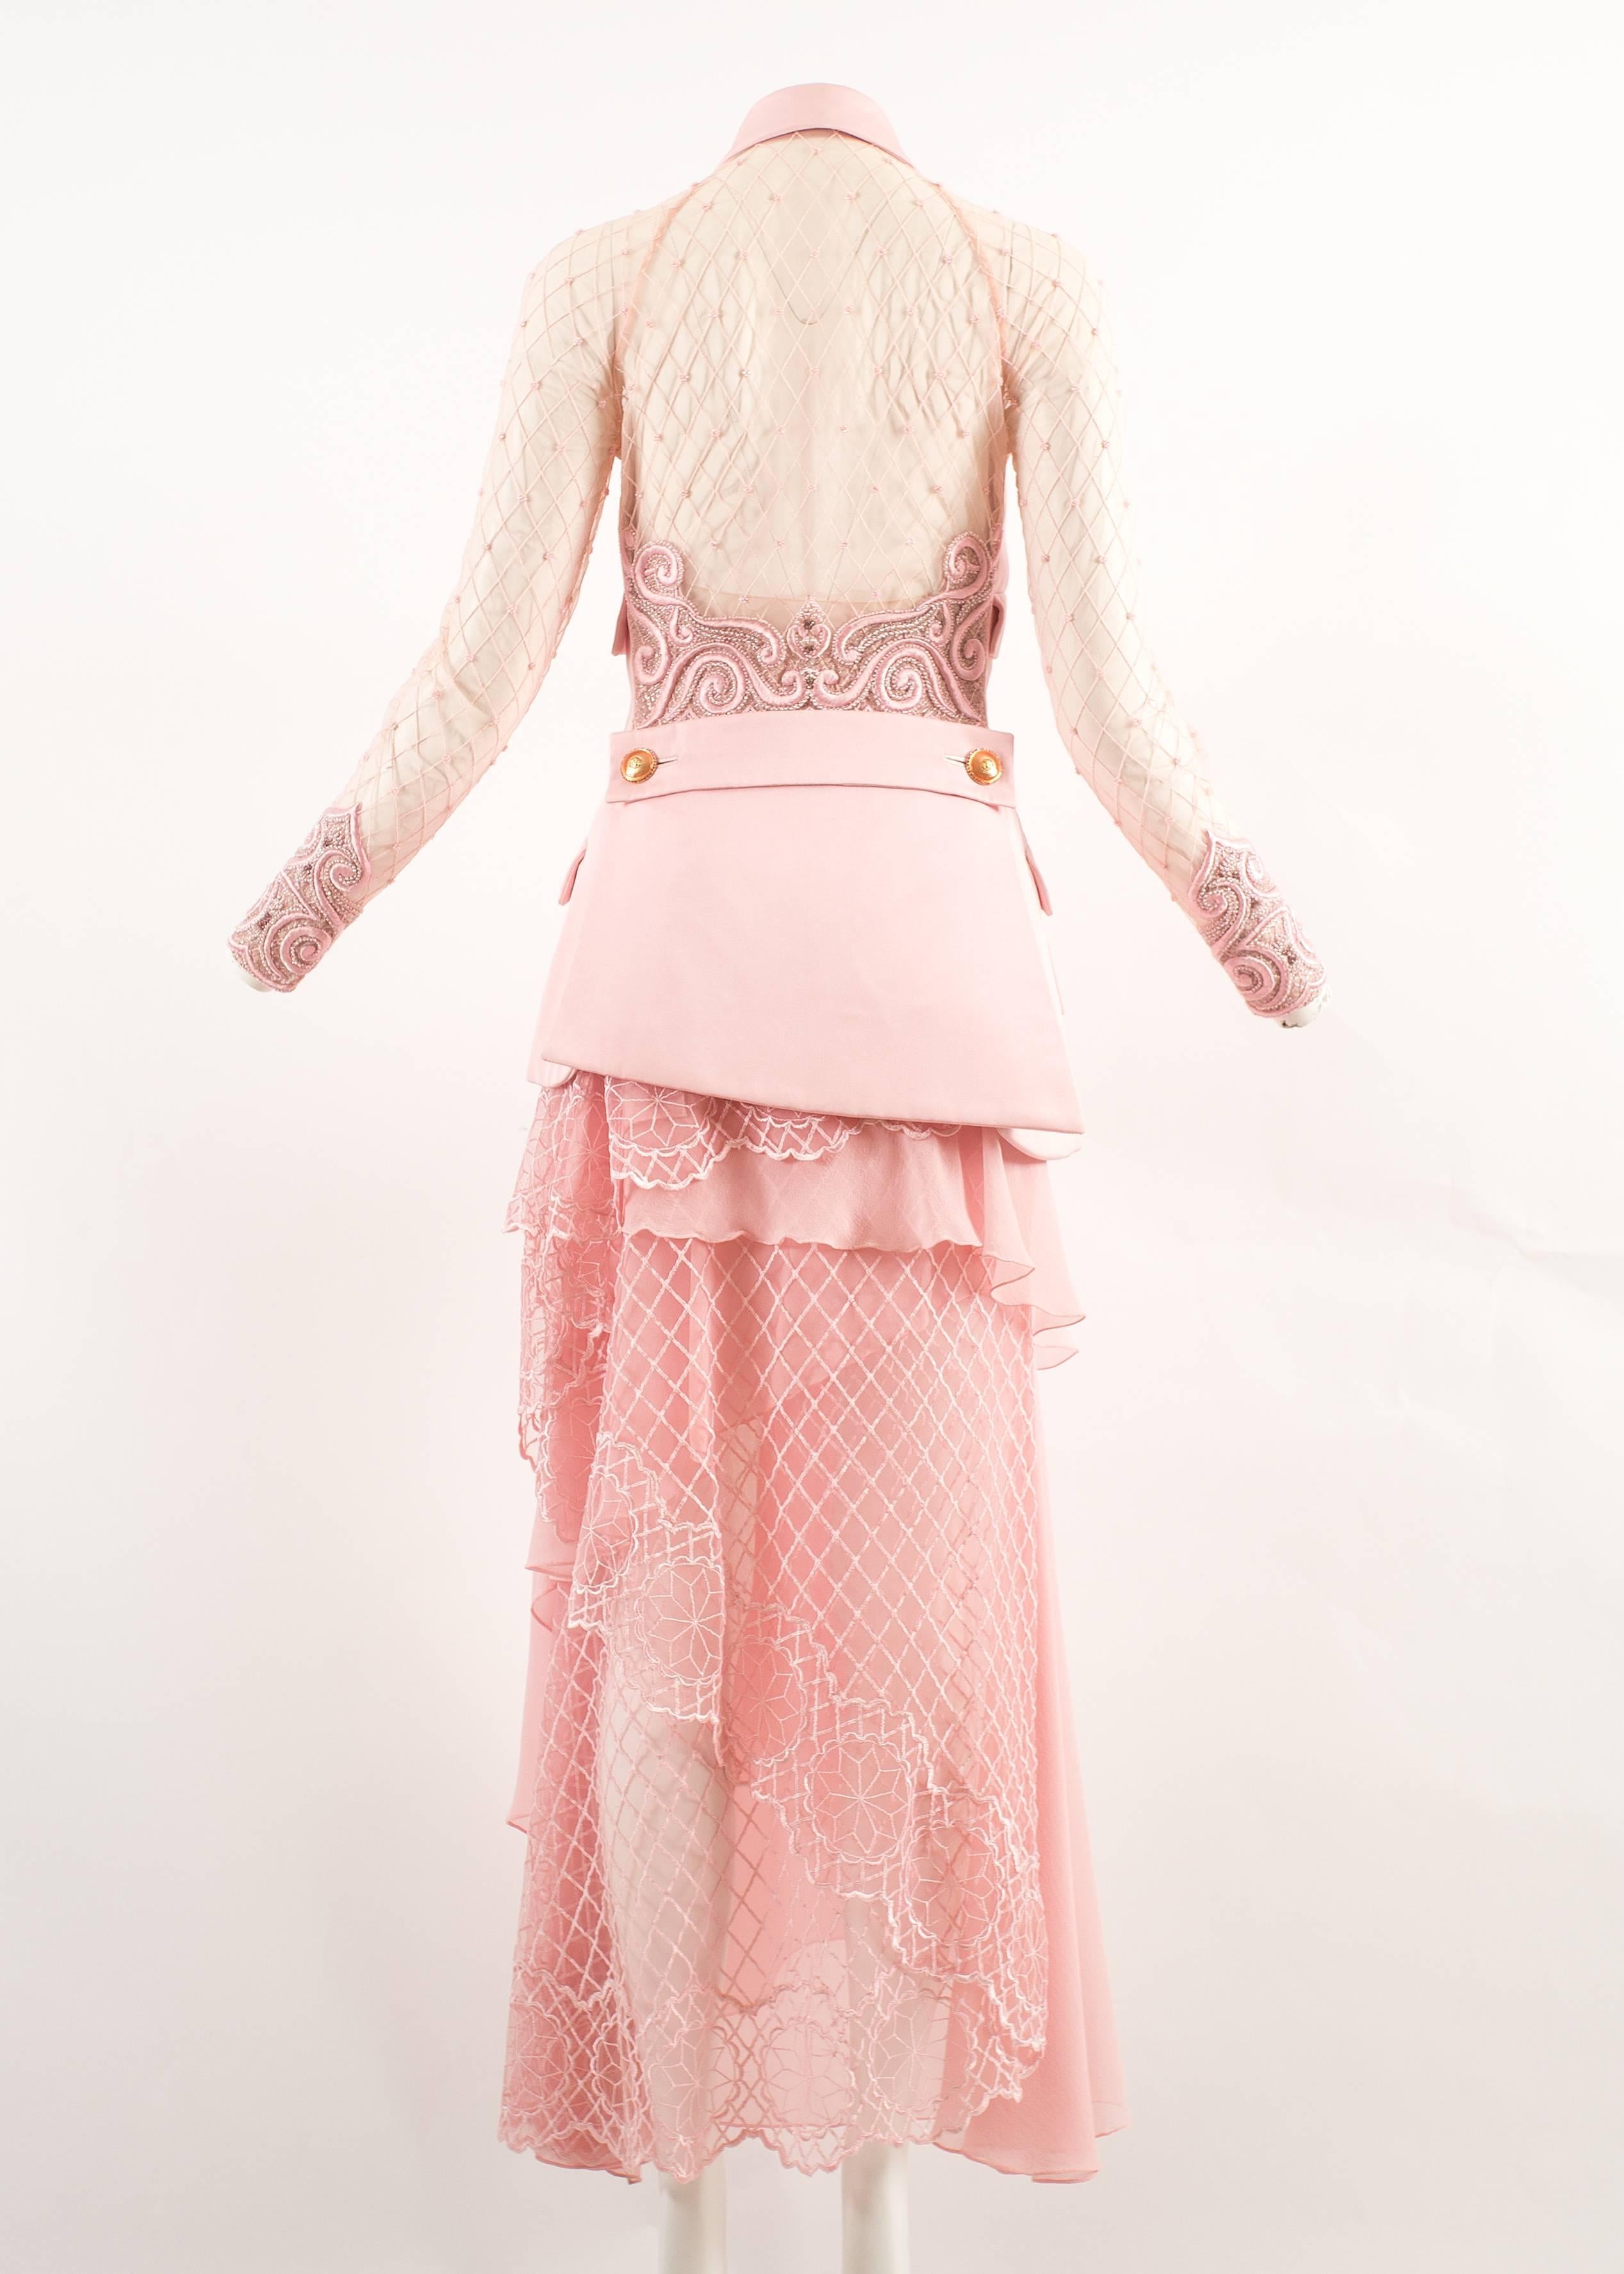 Atelier Versace Autumn-Winter 1993 baby pink embellished 3 piece skirt suit  In Excellent Condition In London, GB